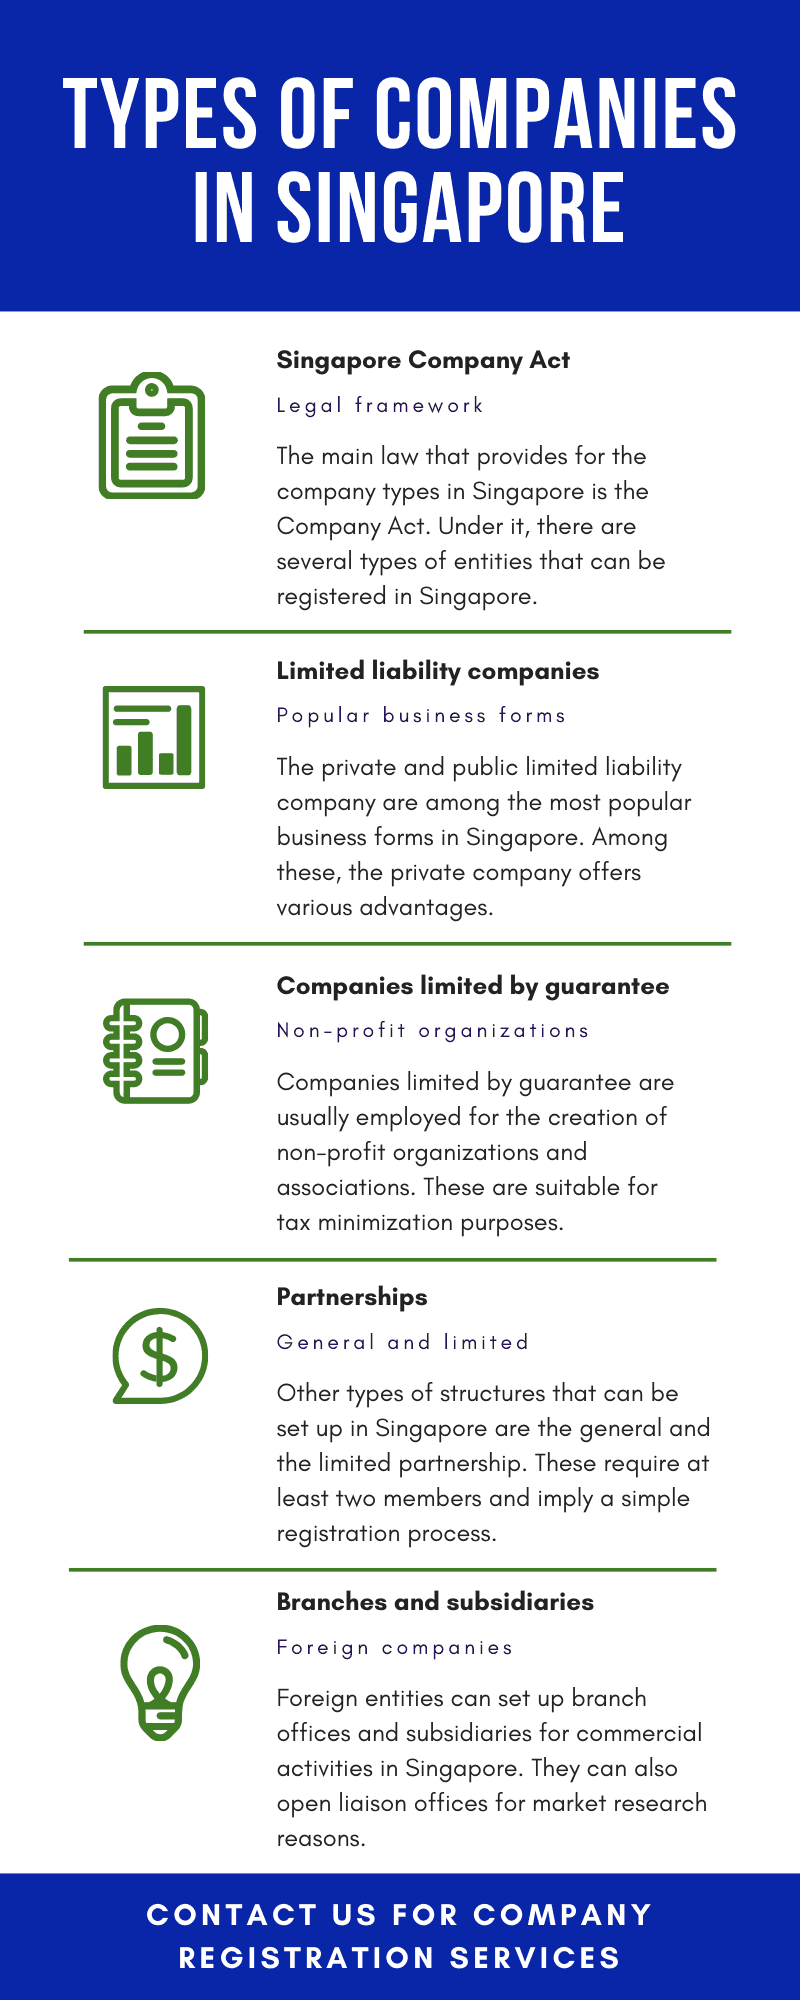 Types of Companies in Singapore